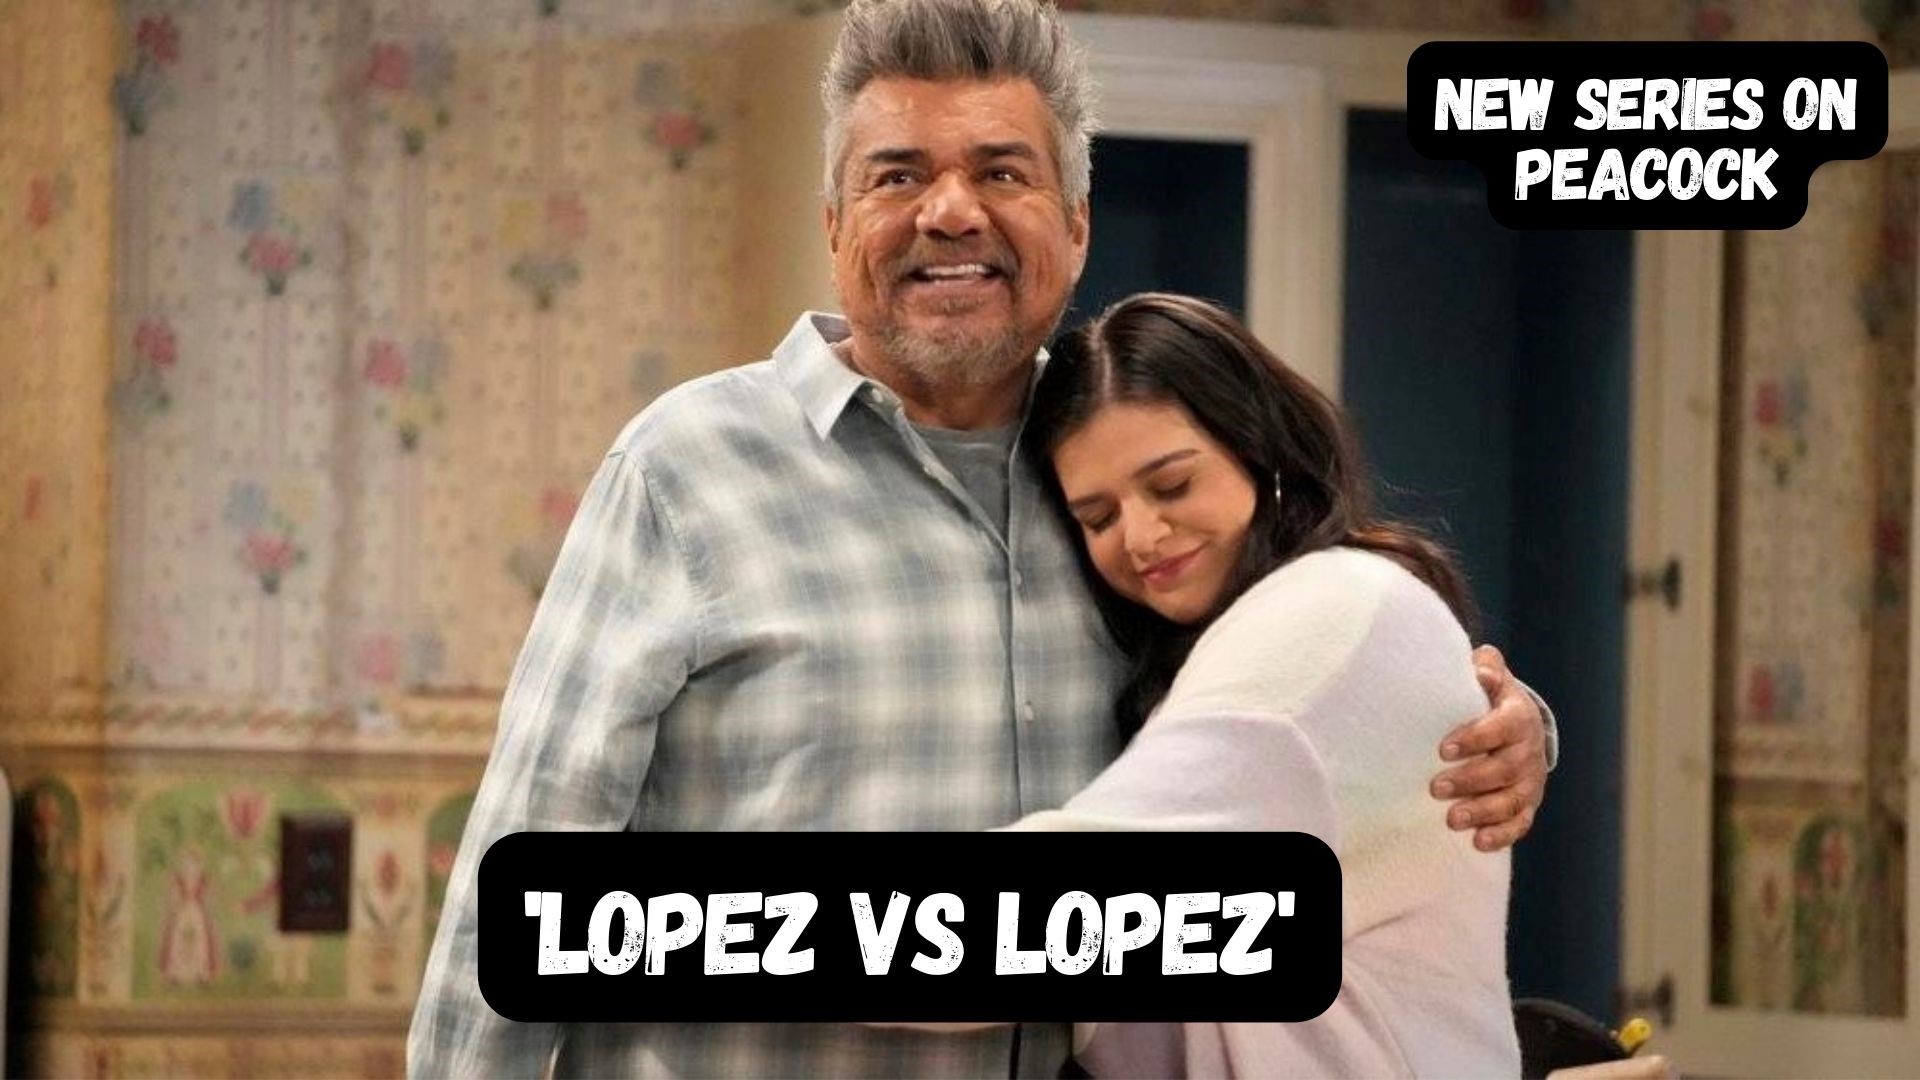 A one-on-one with George Lopez and Mayan Lopez about 'Lopez vs Lopez' on NBC and Peacock.